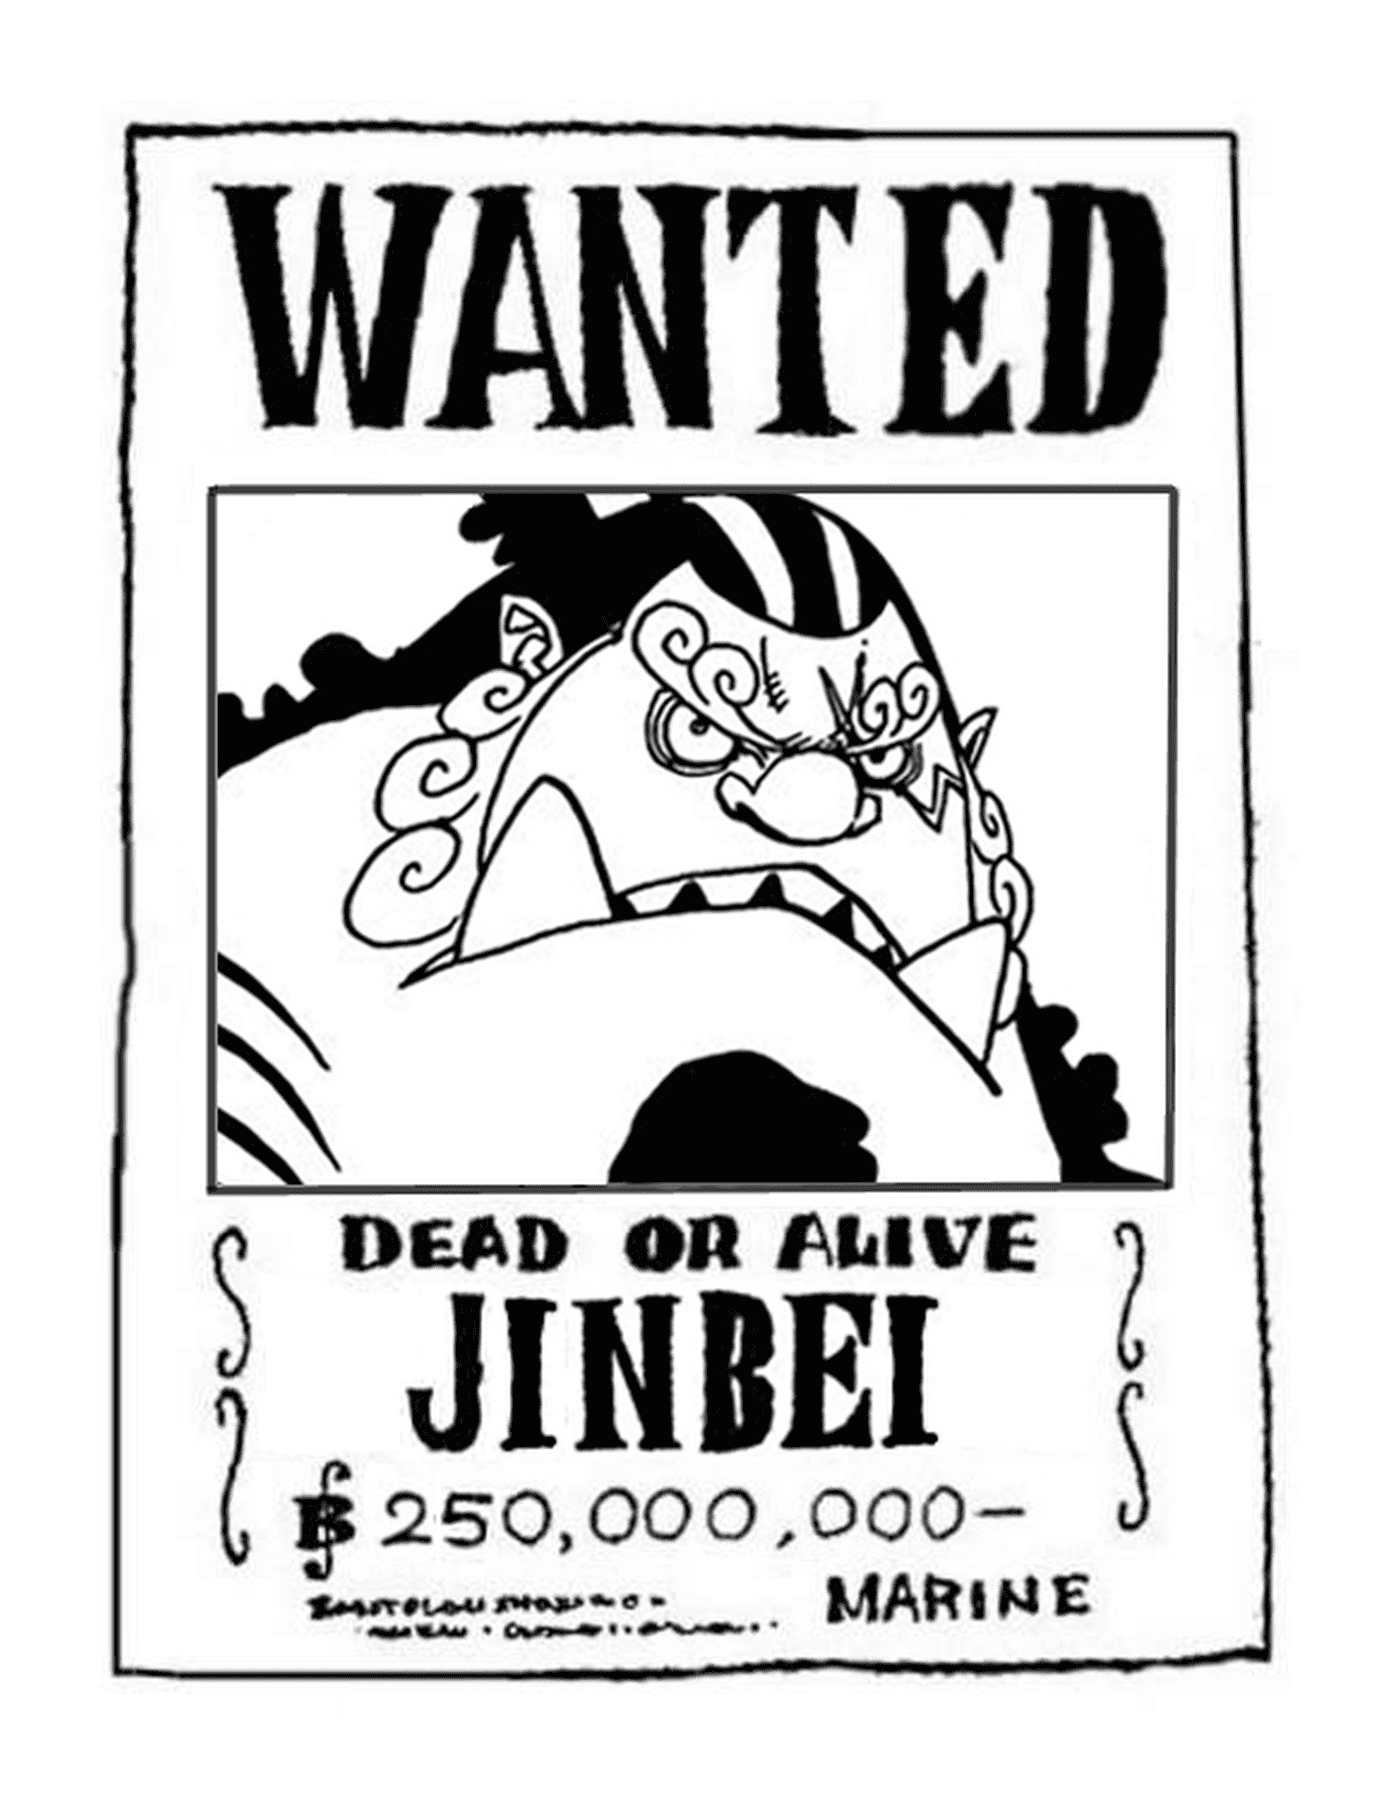  Wanted Jinbei, dead or alive 